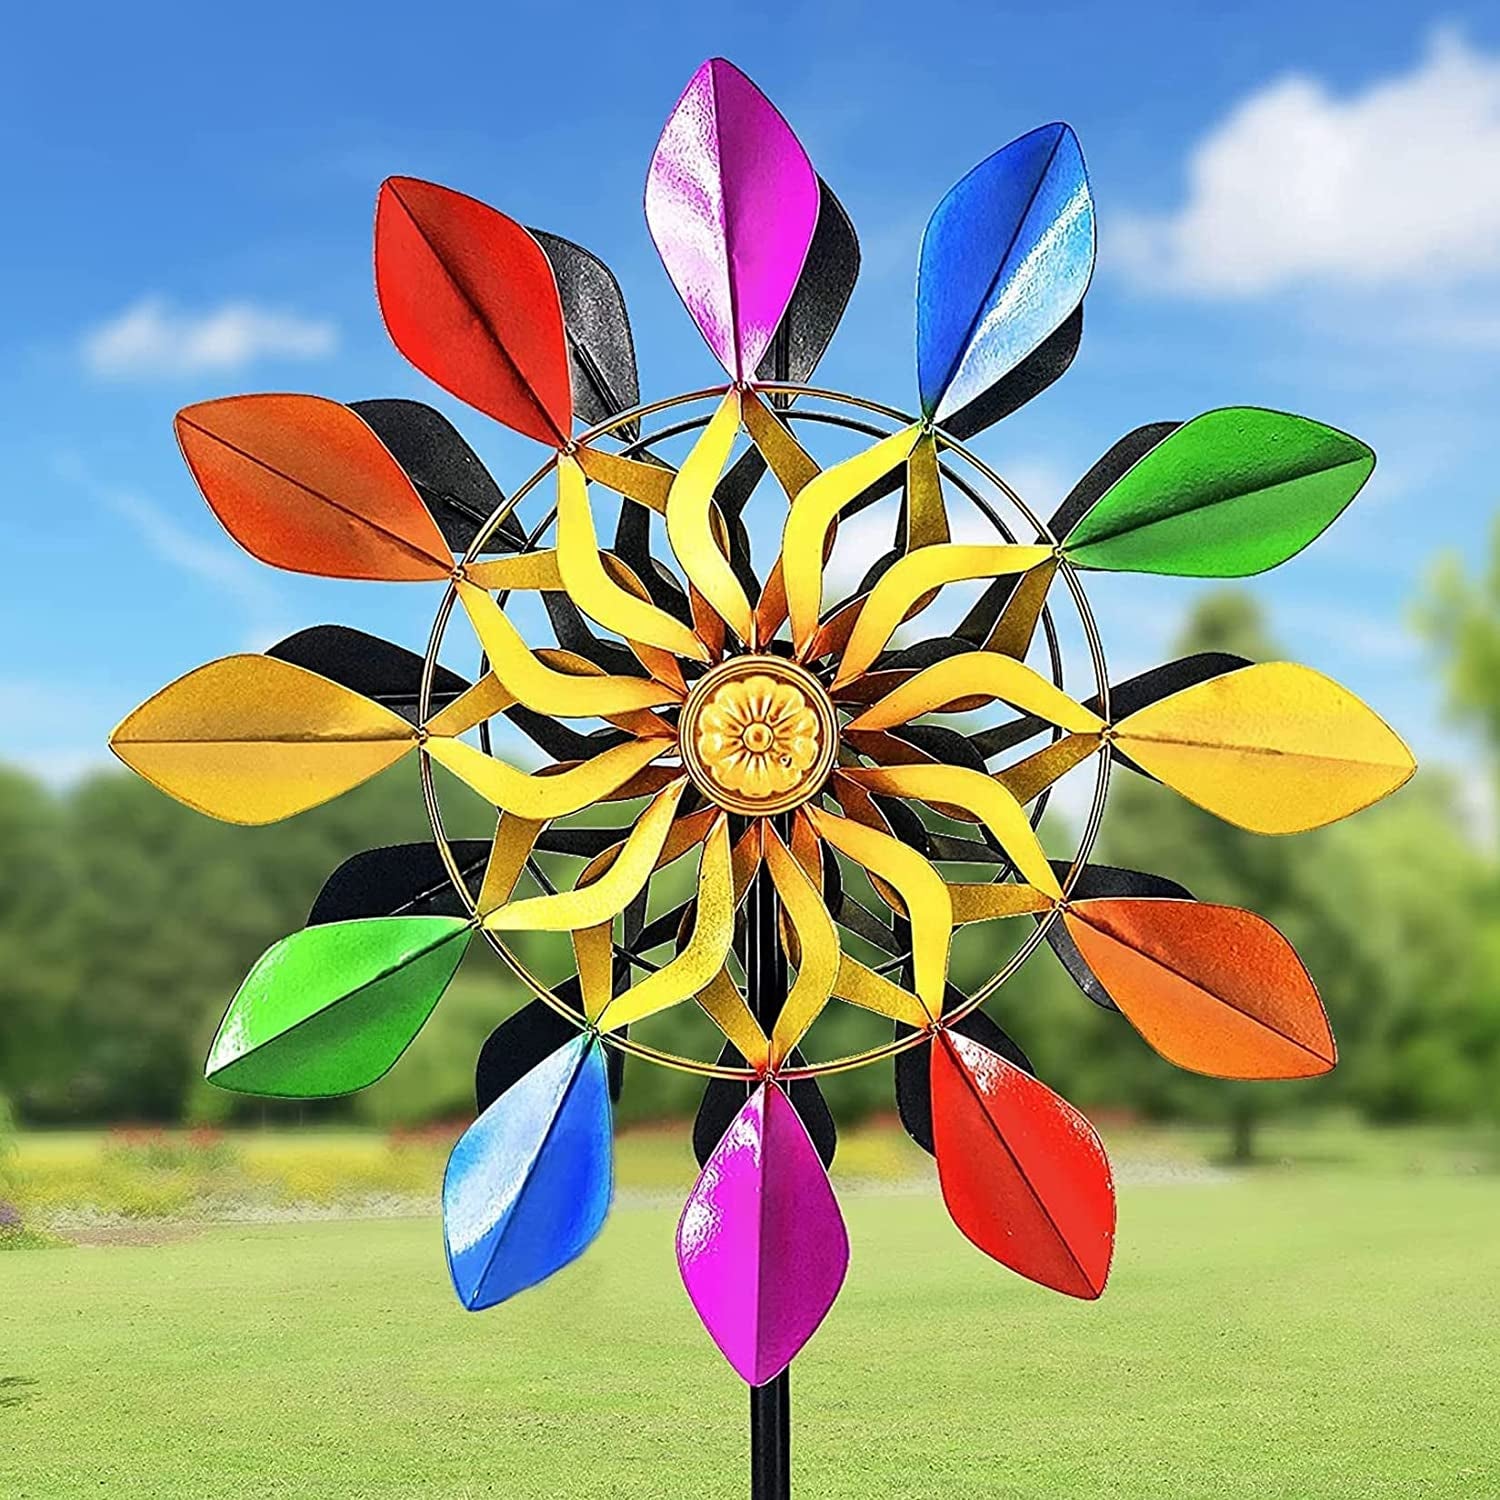 DIBIEECN, Kinetic Wind Spinner with Garden Stake, Rainbow Metal Windmill Garden Decoration, 360 Swivel Outdoor Wind Sculpture, 63 Inch Dual Direction Colorful Wind Catcher for Yard Lawn, Idea Garden Gifts